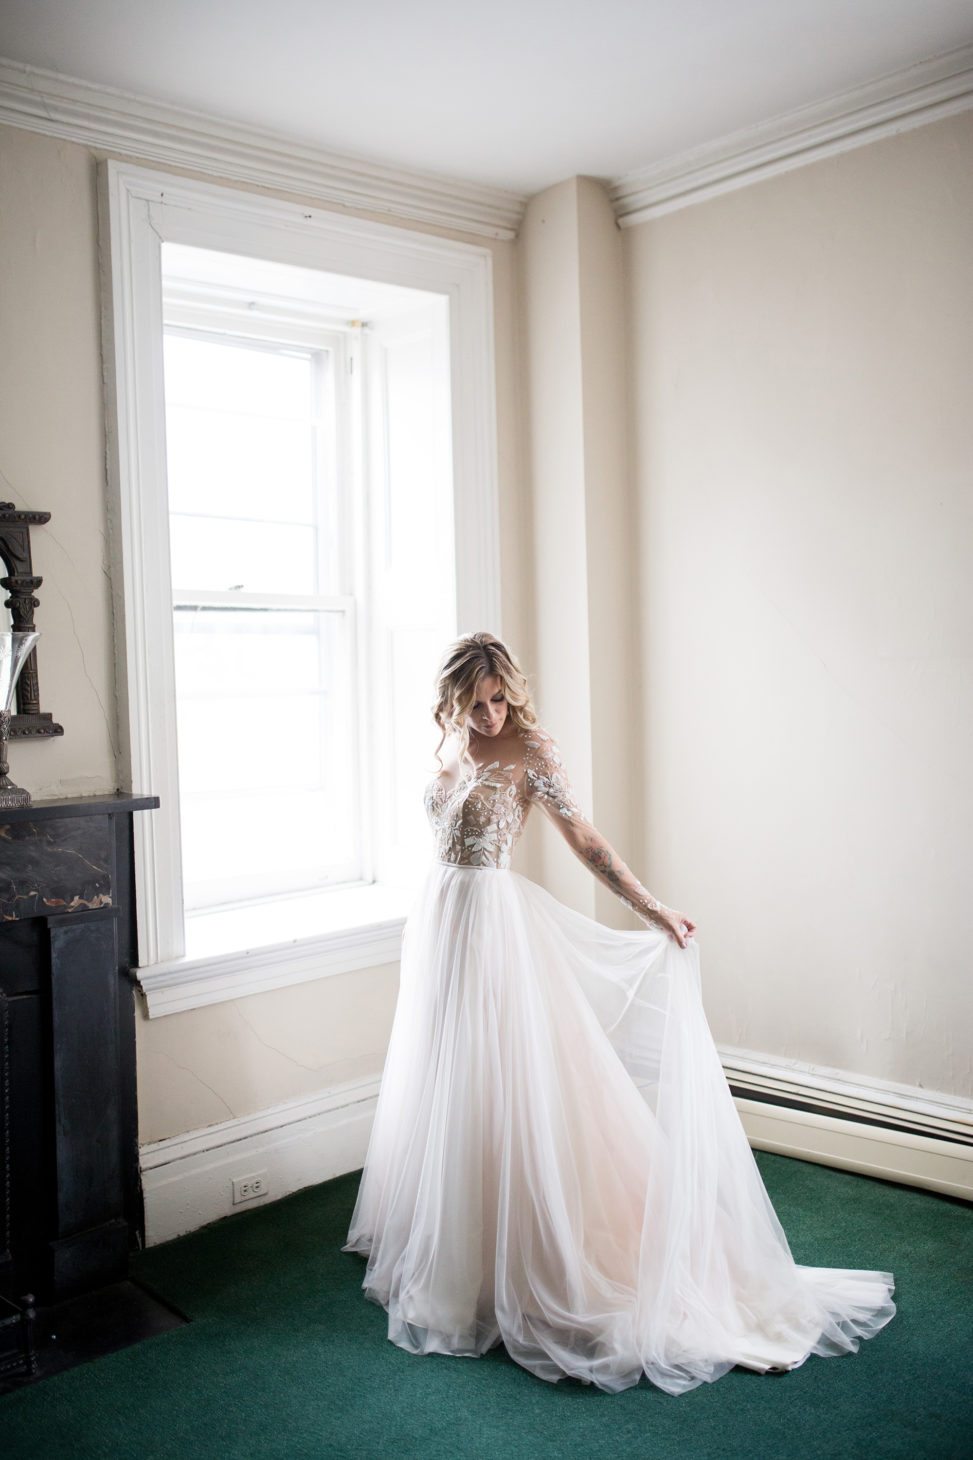 bride in white room with green carpet adjusting train